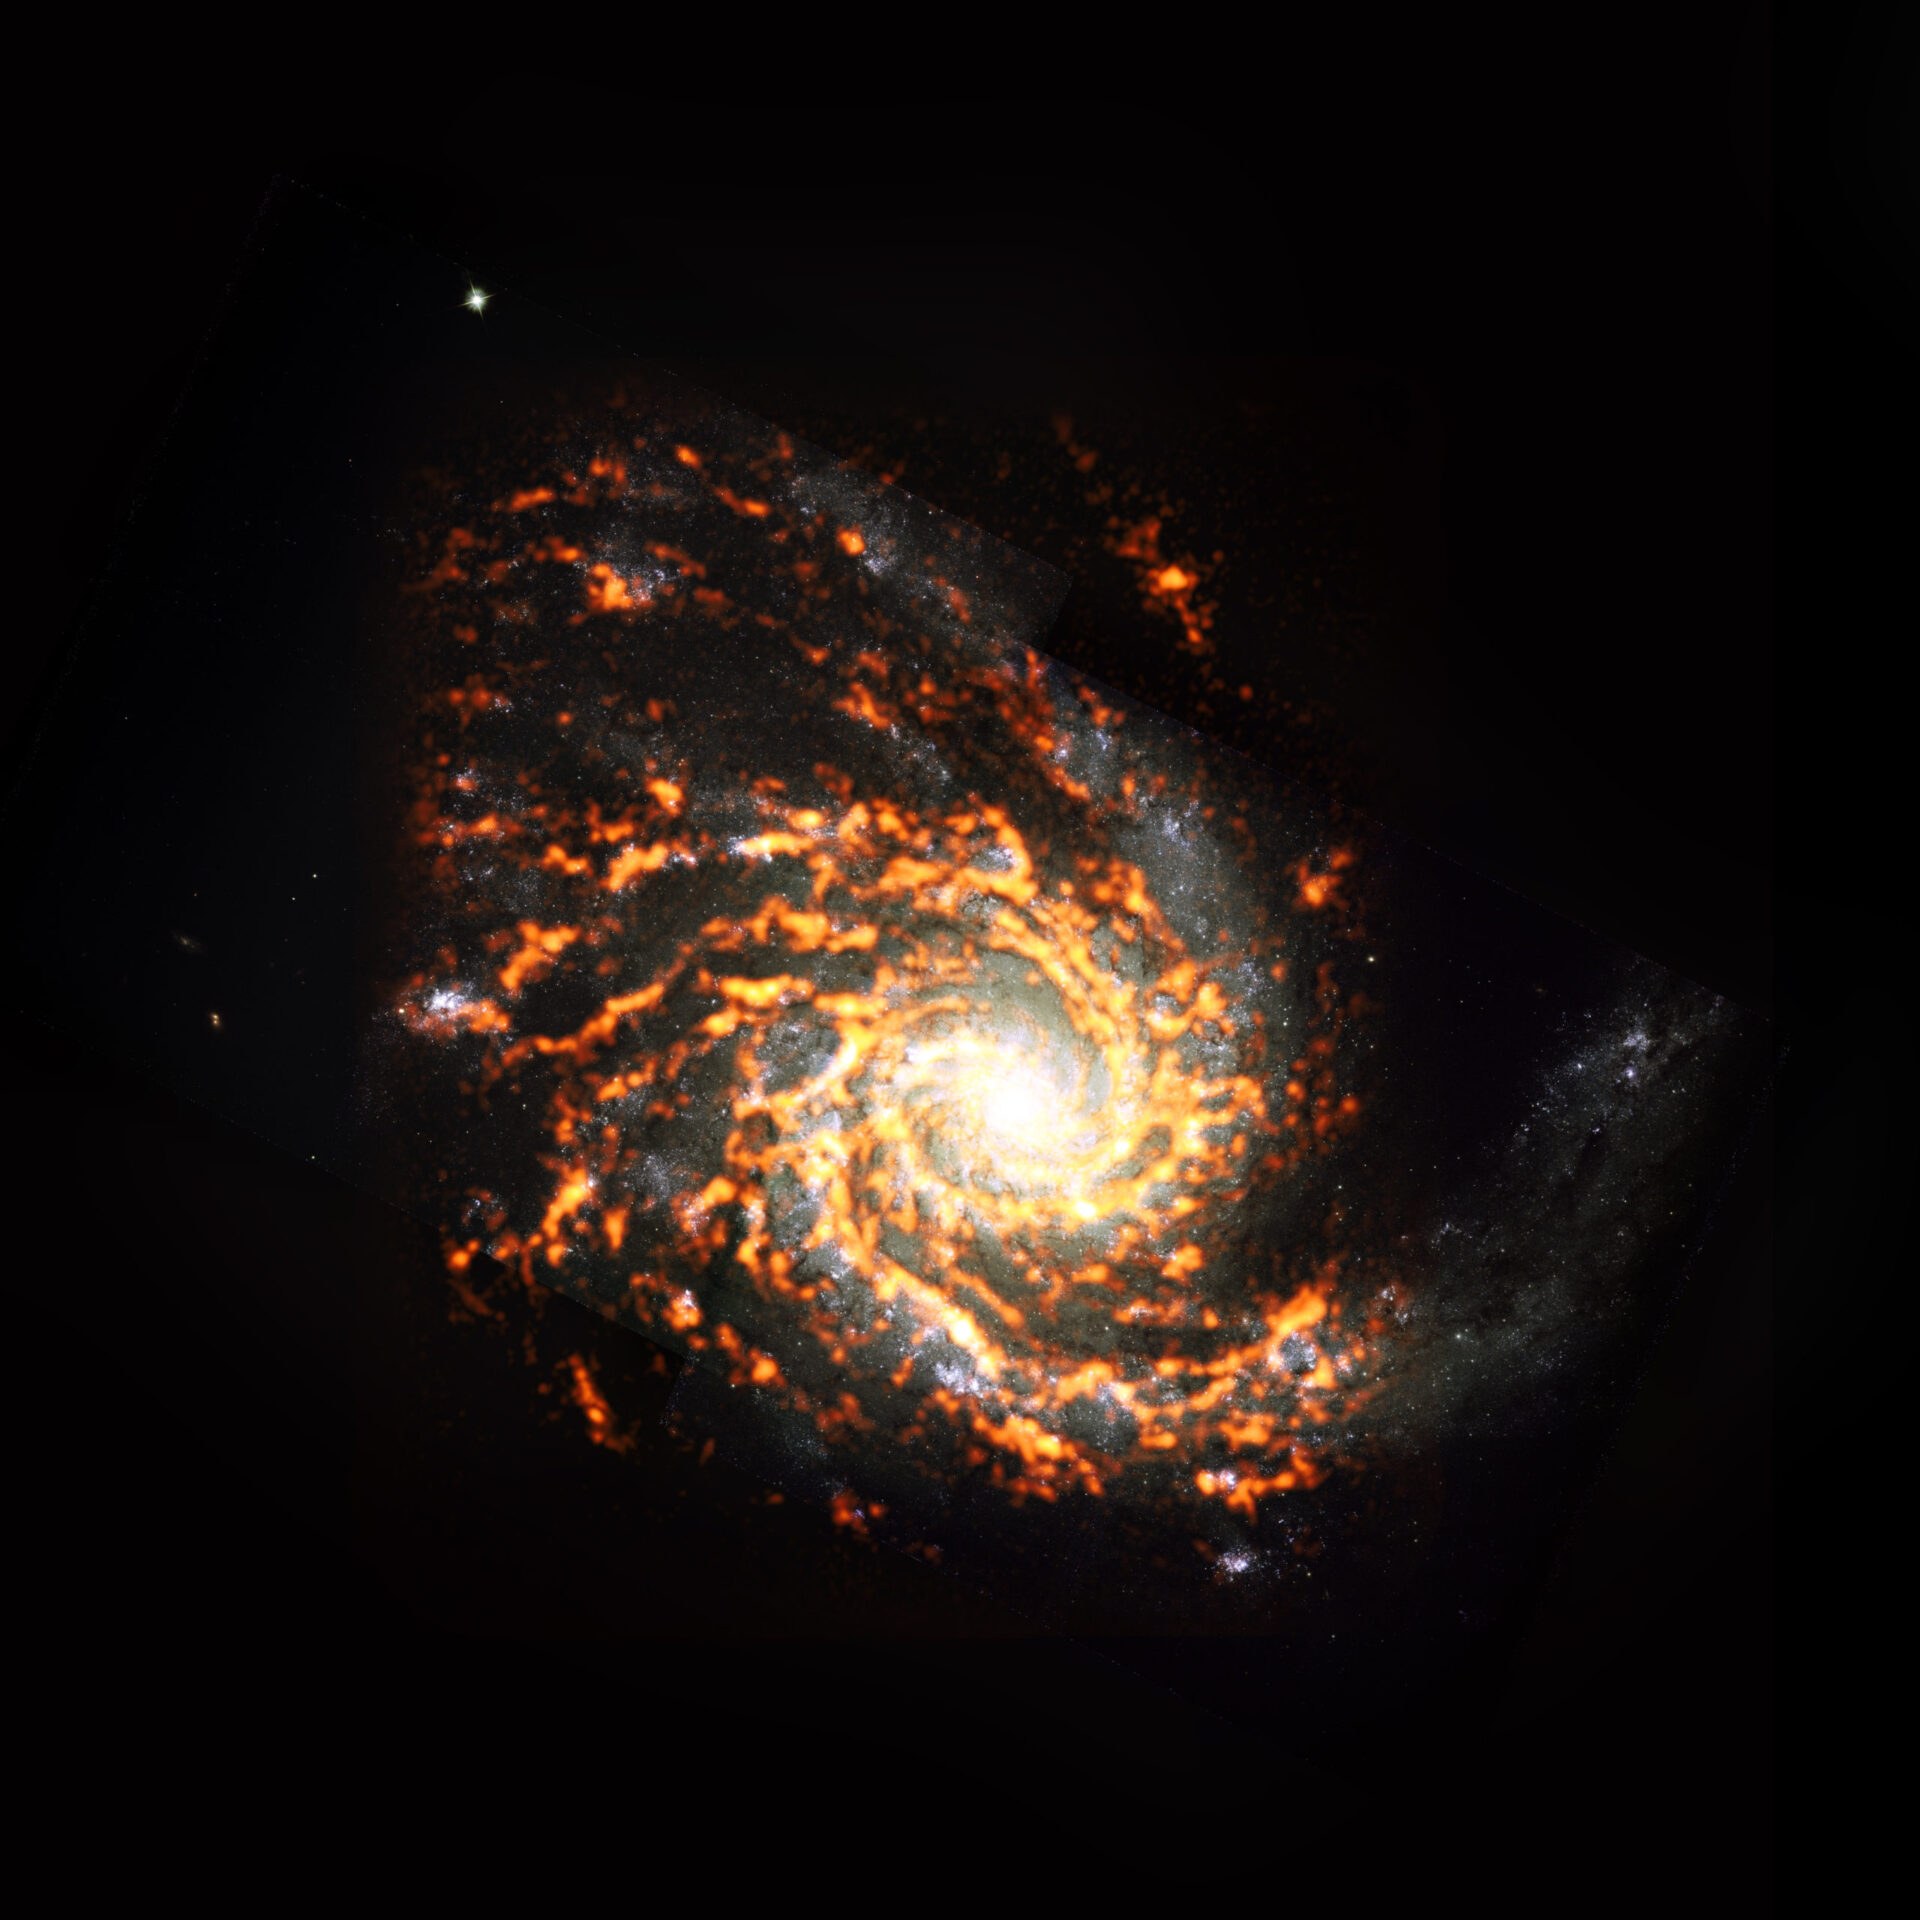 <p>Shown here as an ALMA (orange/red) composite with Hubble Space Telescope (HST) data, NGC4254 was among the nearly 100 galaxies included in the recent PHANGS project census of galaxies in the nearby Universe. The survey found that stellar nurseries within these galaxies vary widely in appearance and behavior, and that these characteristics heavily depend on where the stellar nurseries are located. NGC4254 is an example of a galaxy featuring M type morphology. Credit: ALMA (ESO/NAOJ/NRAO)/PHANGS, S. Dagnello (NRAO)</p>
